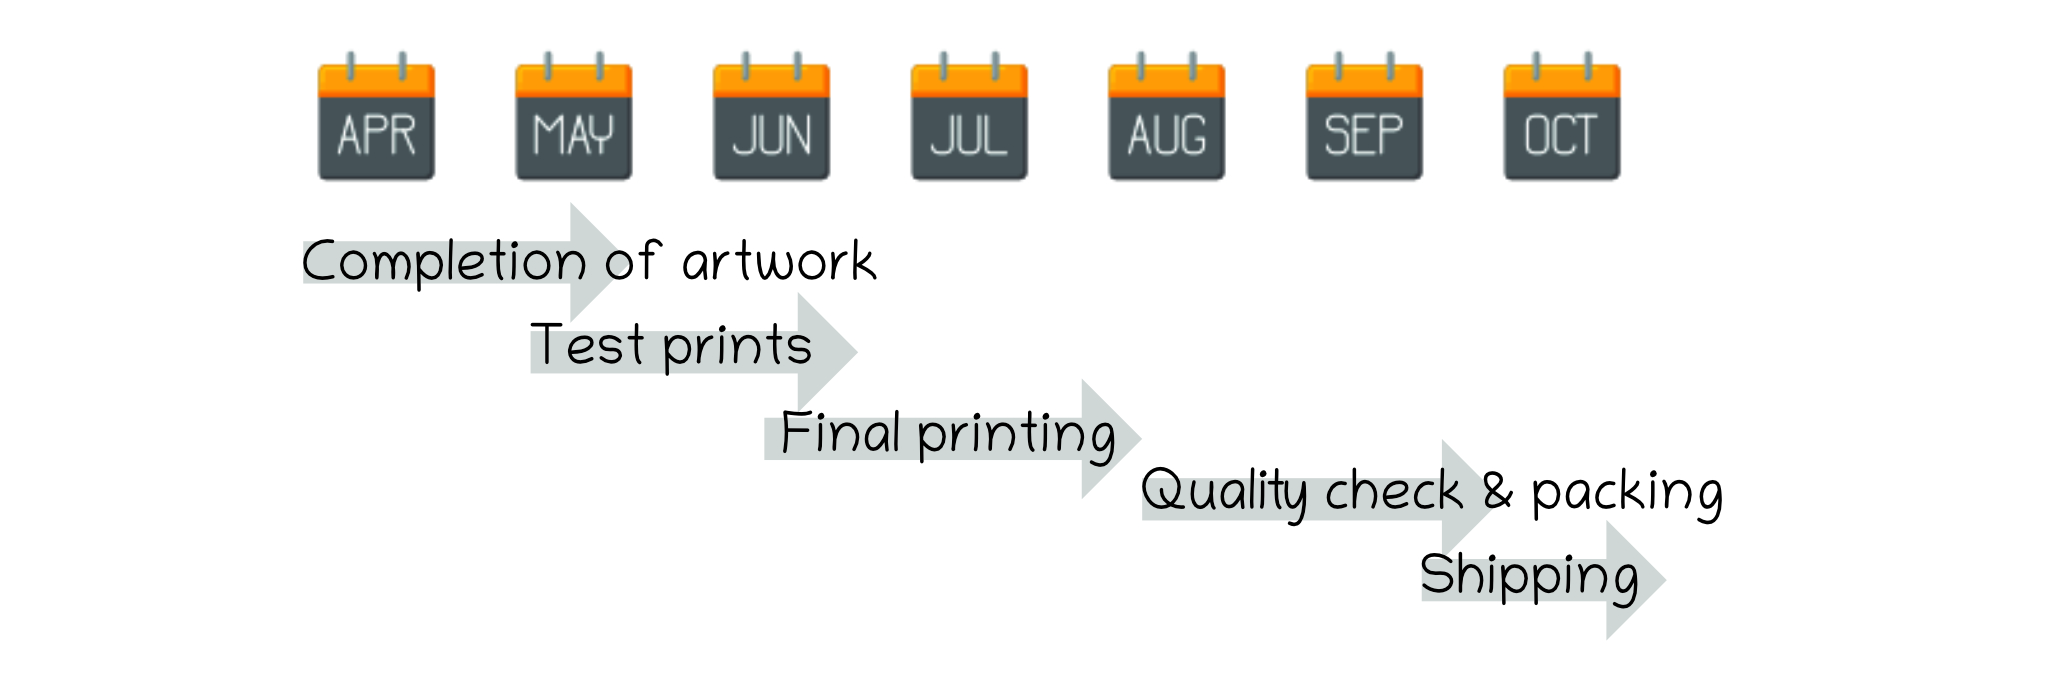 Timeline of events: Apr-May - completion of artwork May-Jun - Test prints Jun-Jul - Final printing Aug-Sep - Quality check &amp; packing Sep-Oct - Shipping